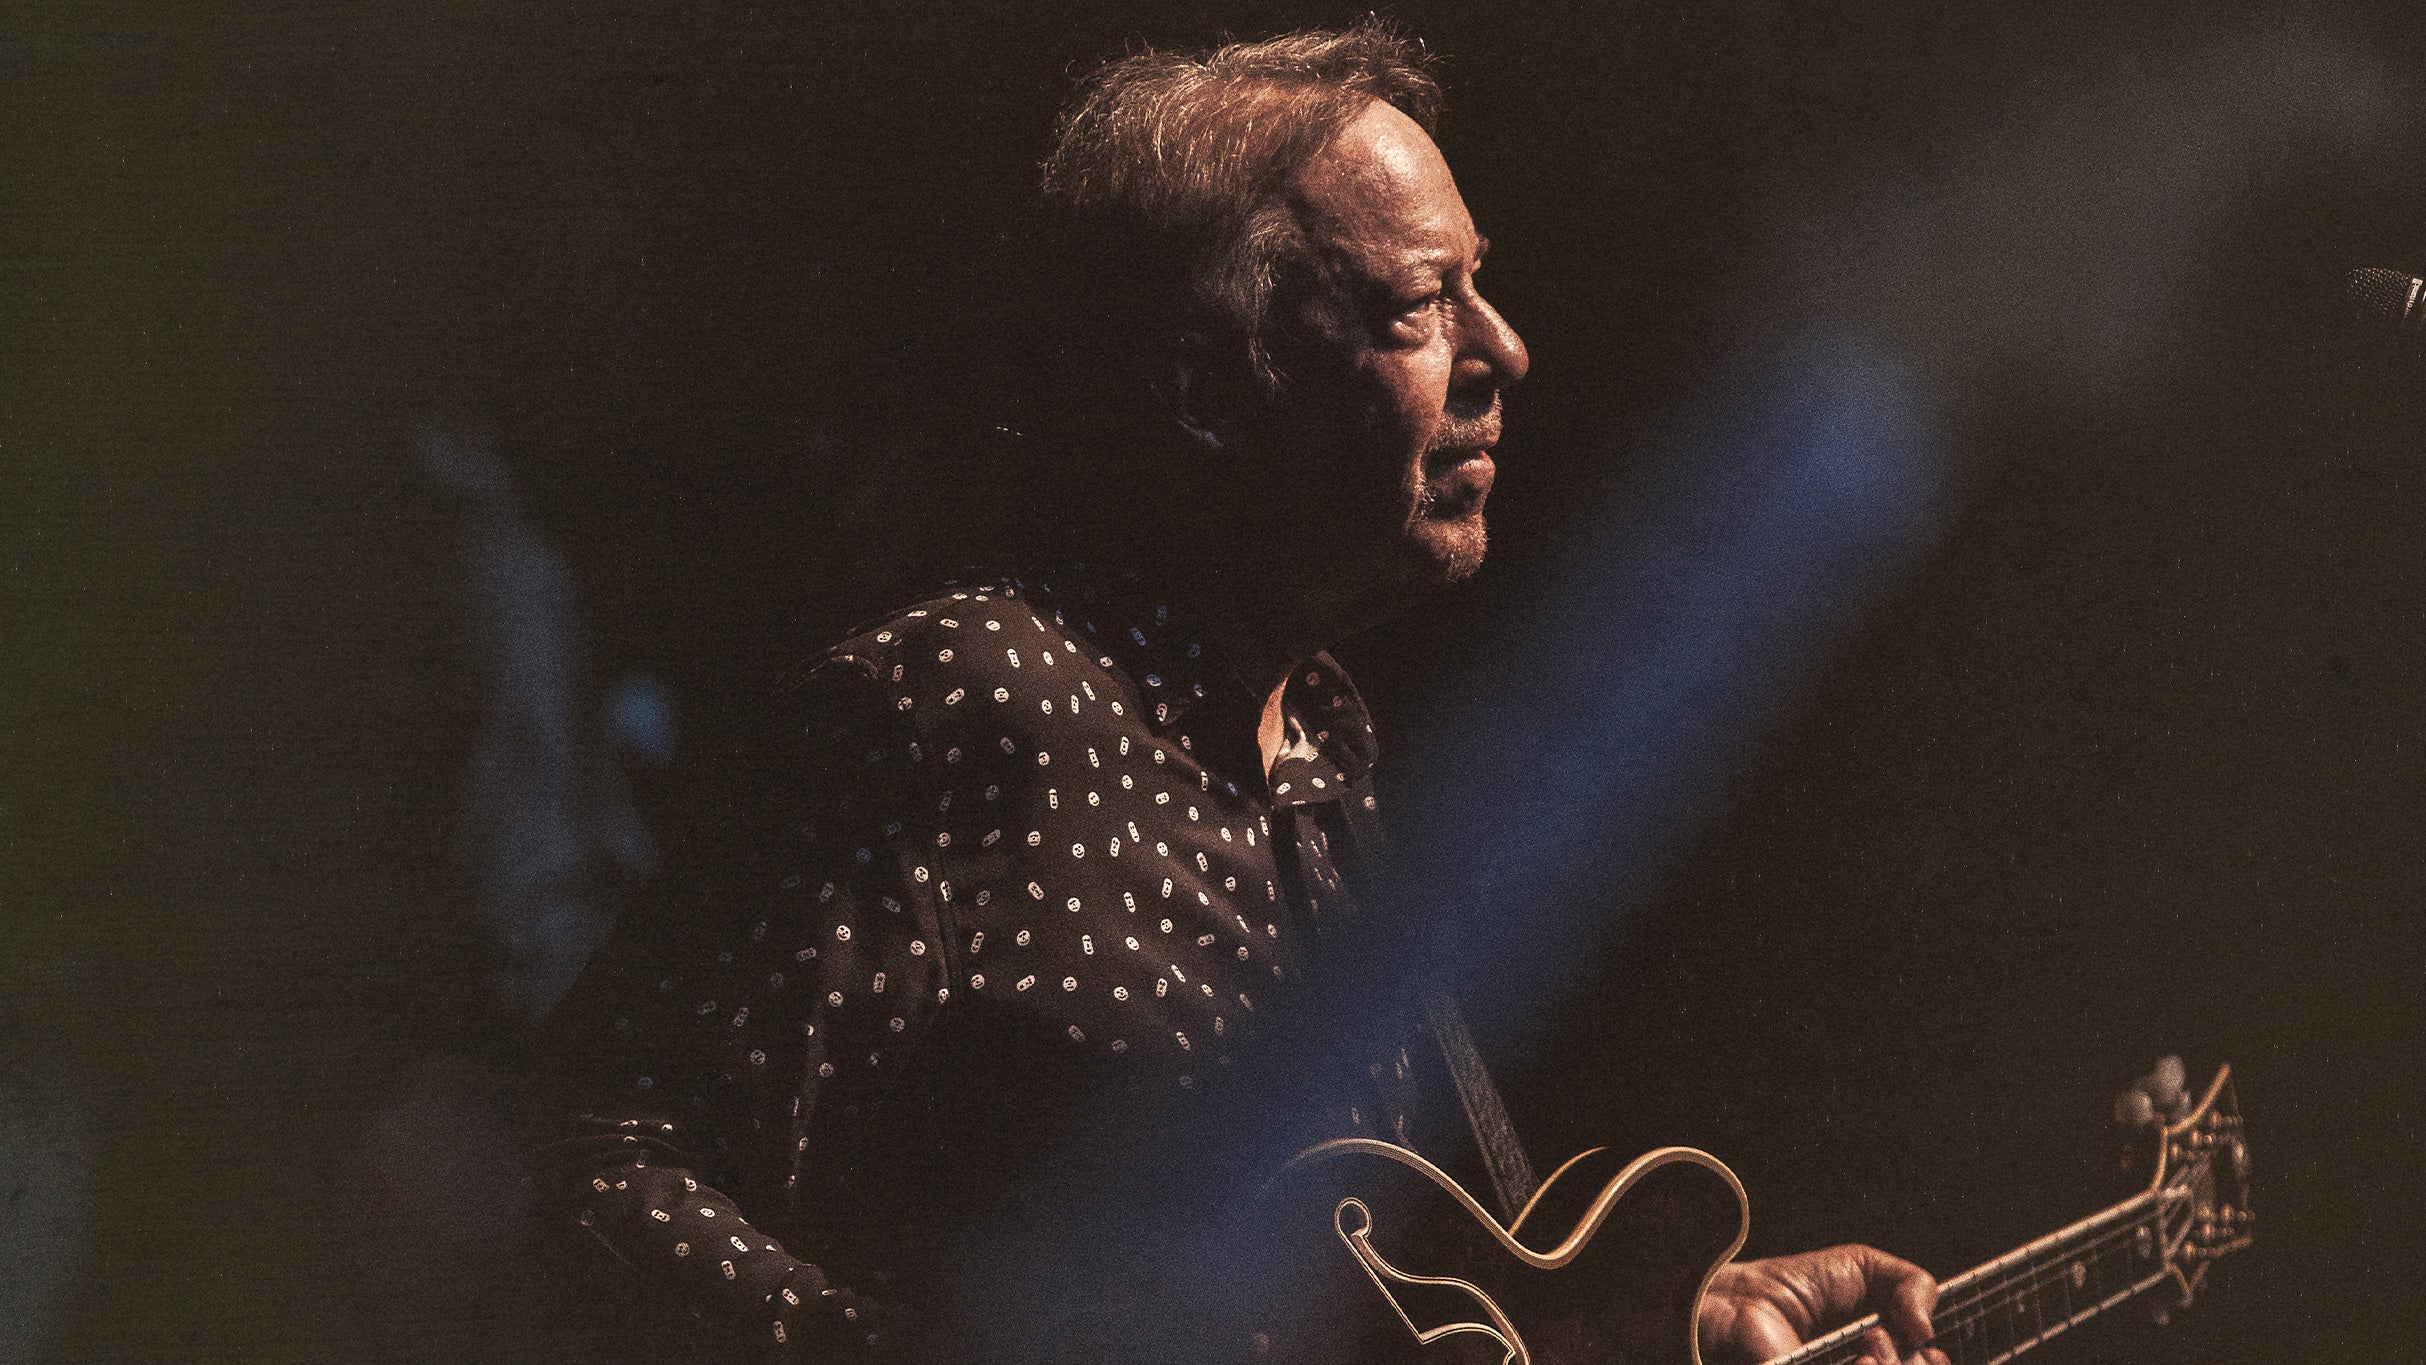 Boz Scaggs - Summer '23 Tour free pre-sale password for early tickets in Madison